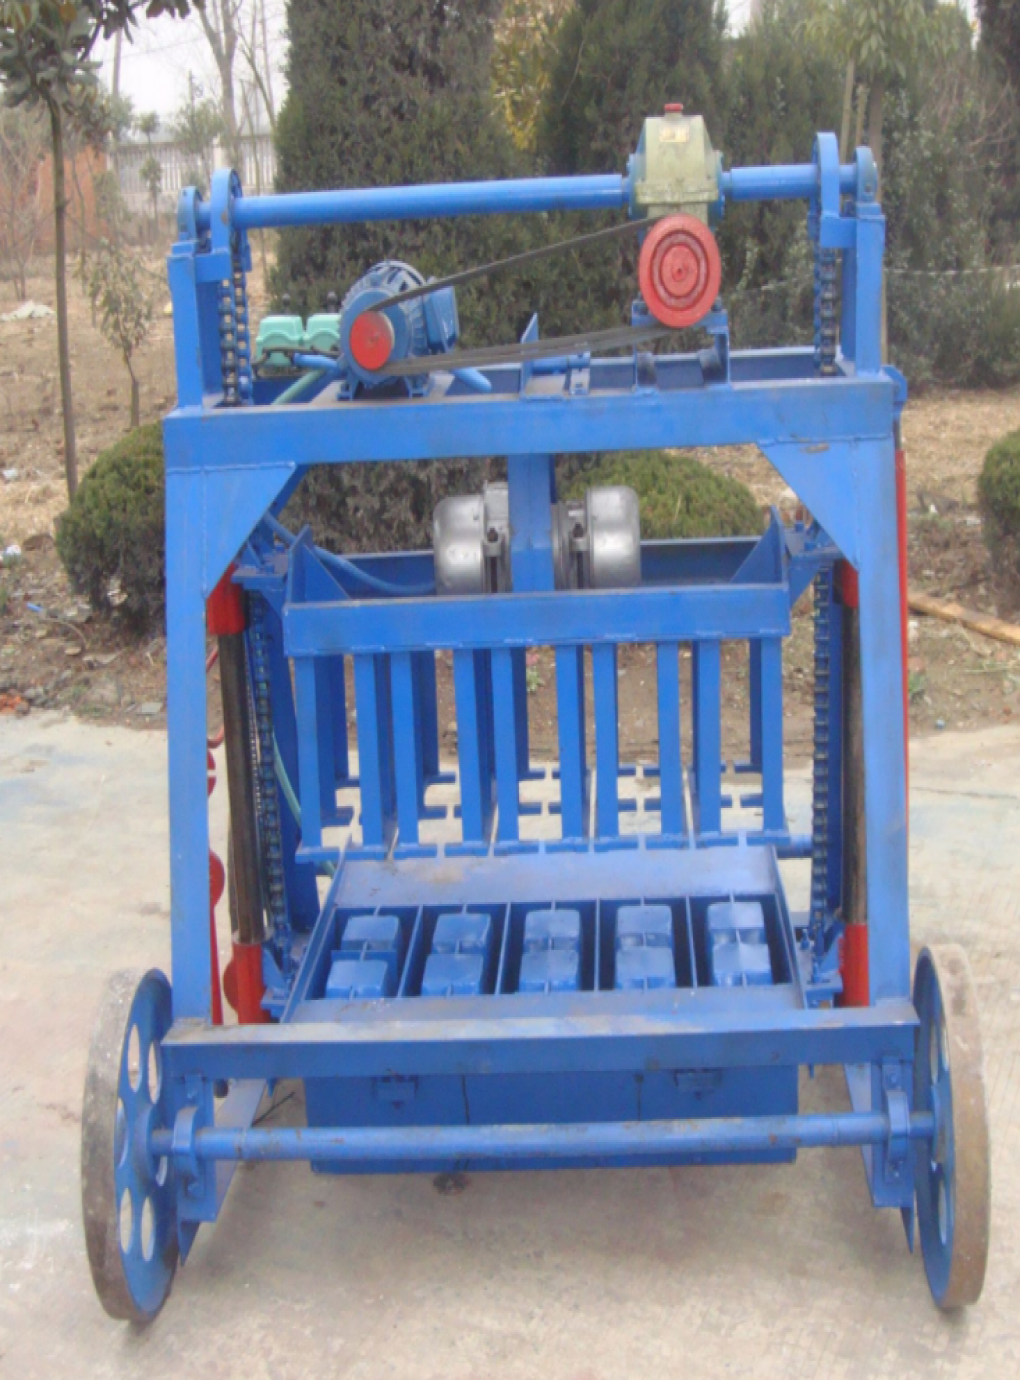 Easy hollow Brick making machine（affordable）